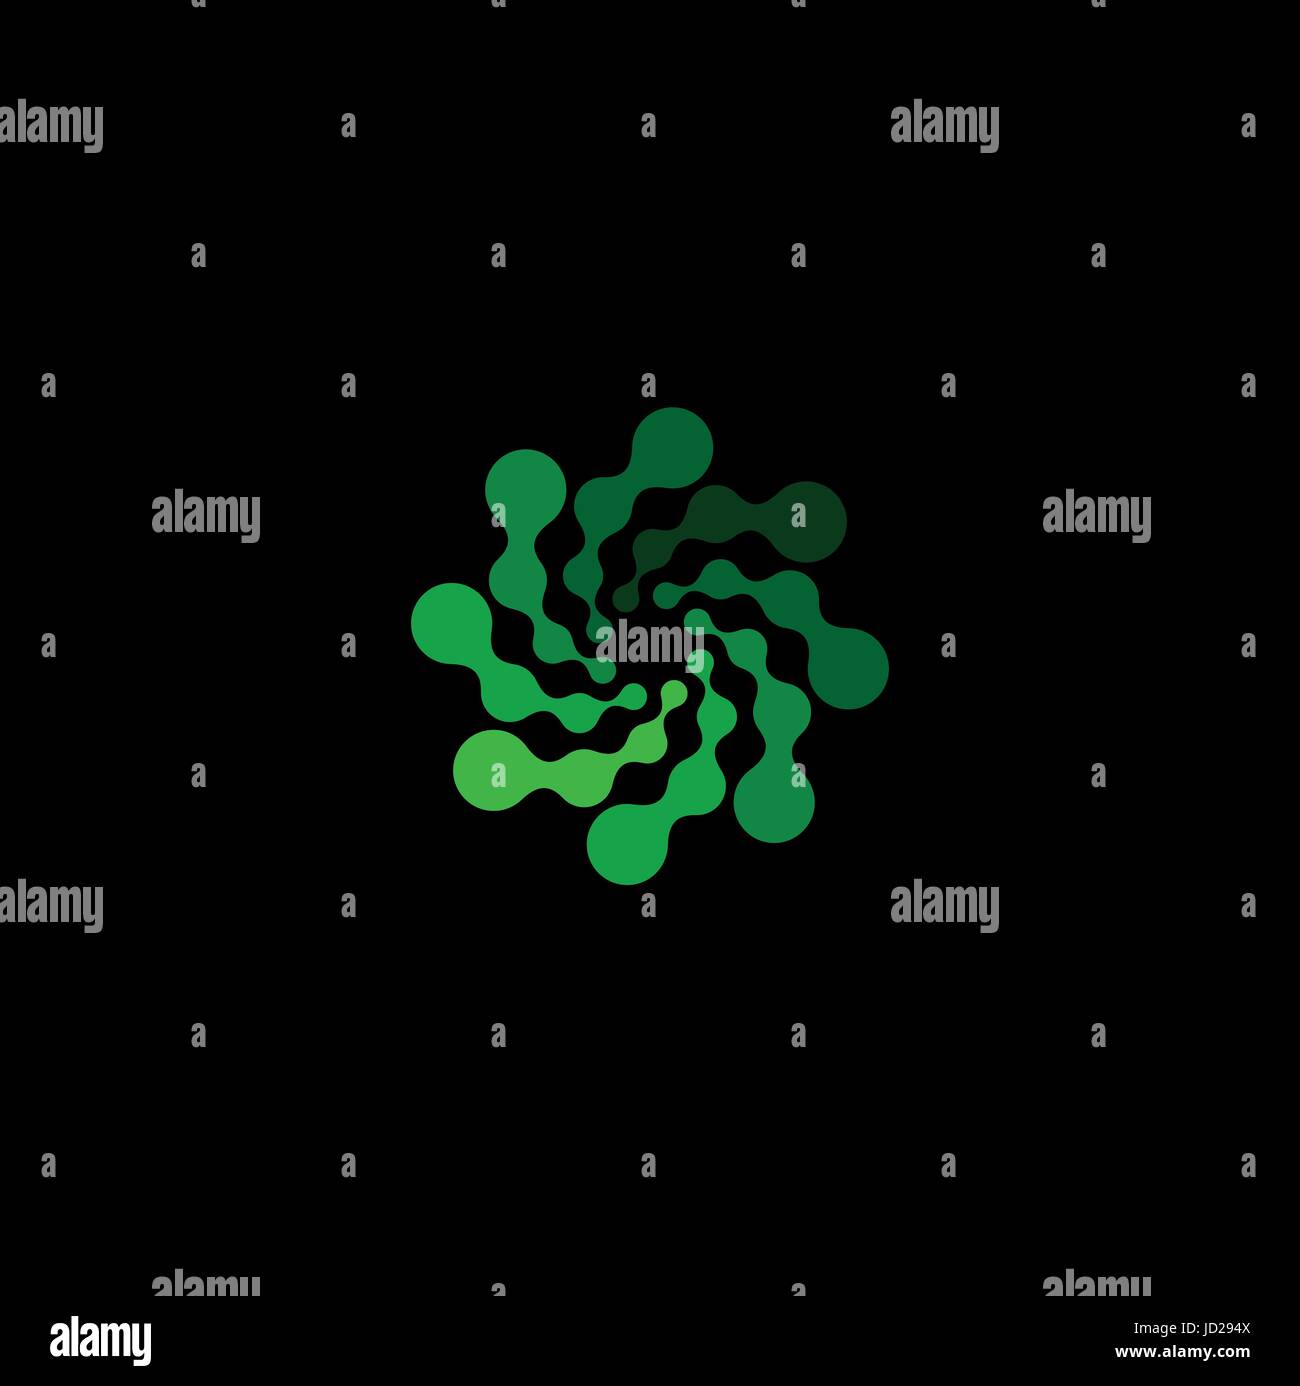 Isolated abstract green color round shape logo on black background, simple flat dotted swirl logotype, flower vector illustration. Stock Vector